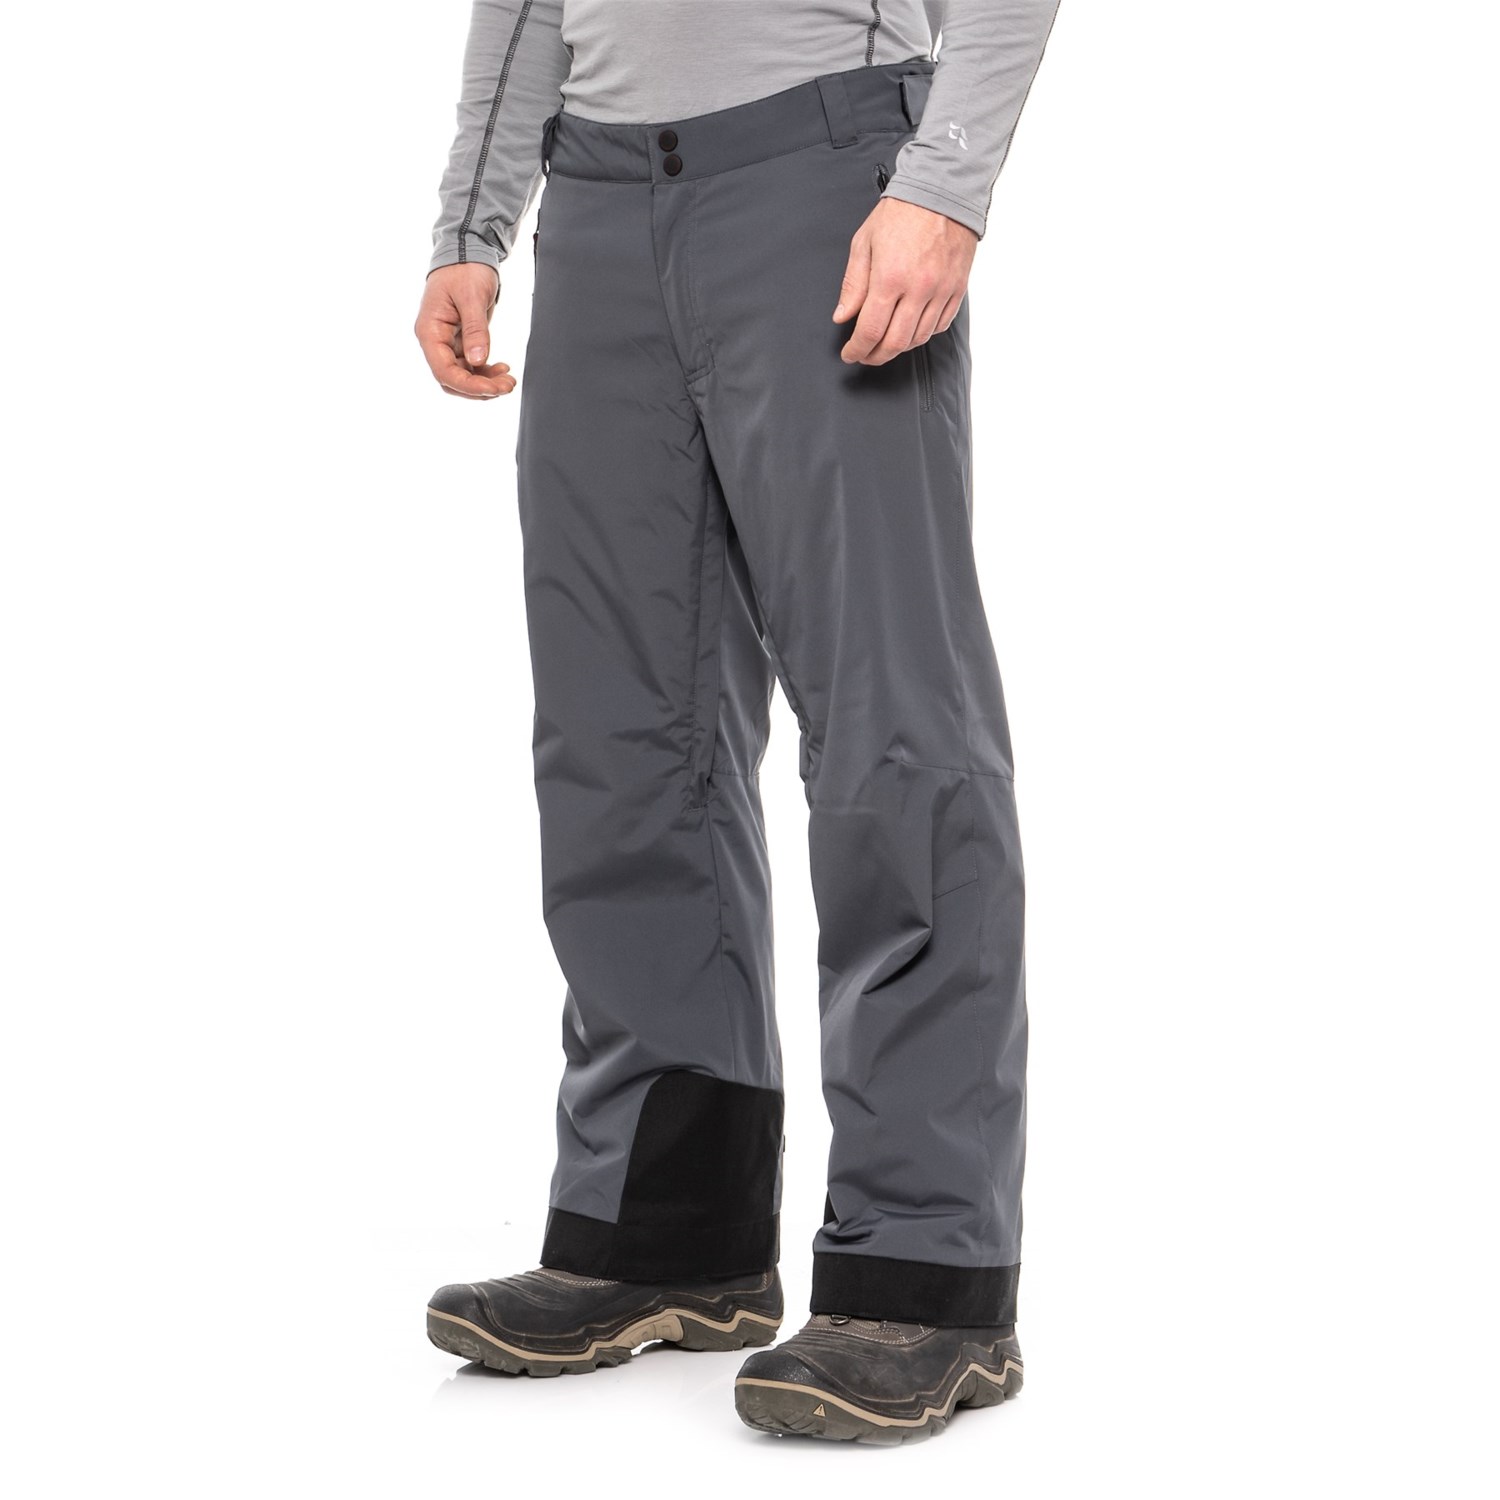 Obermeyer Alpinist Stretch Ski Pants – Waterproof, Insulated (For Men)